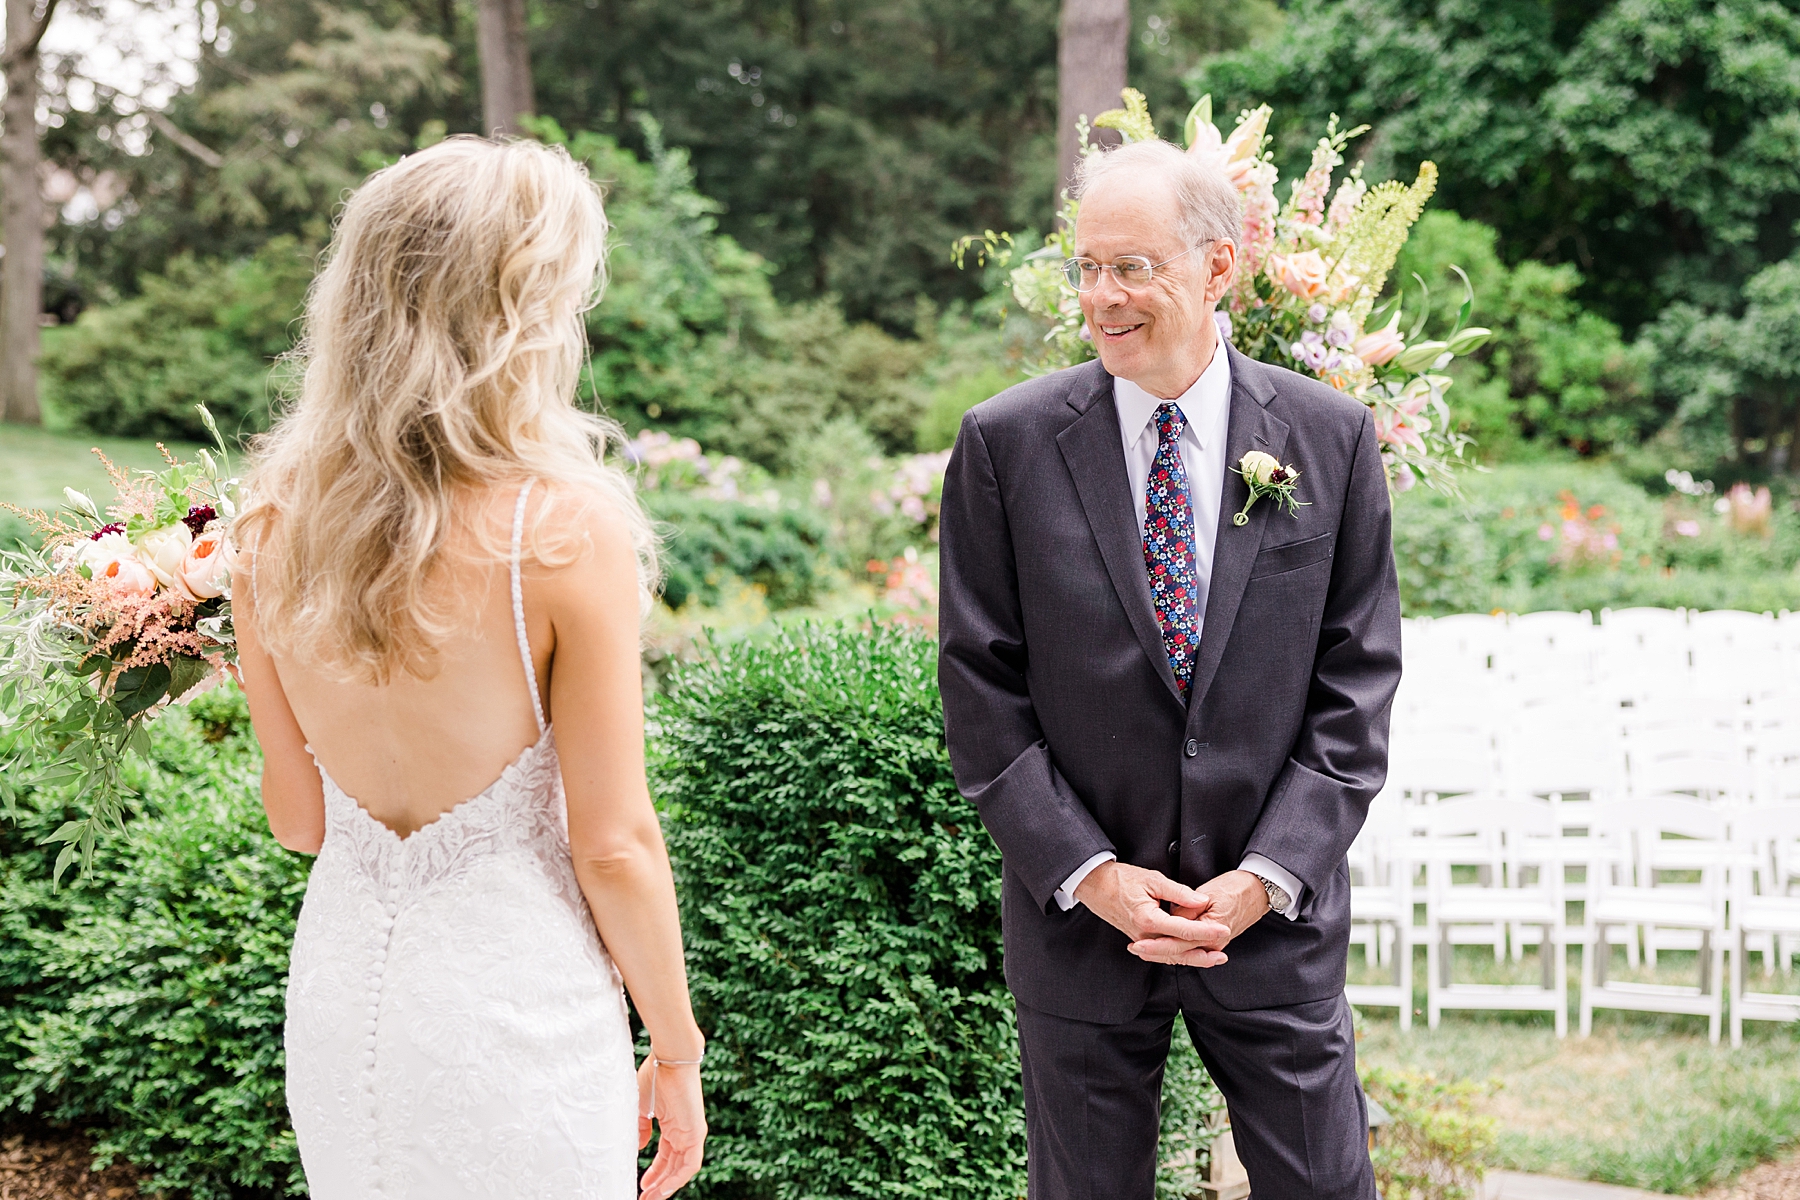 dad's reaction to seeing his daughter in her wedding dress